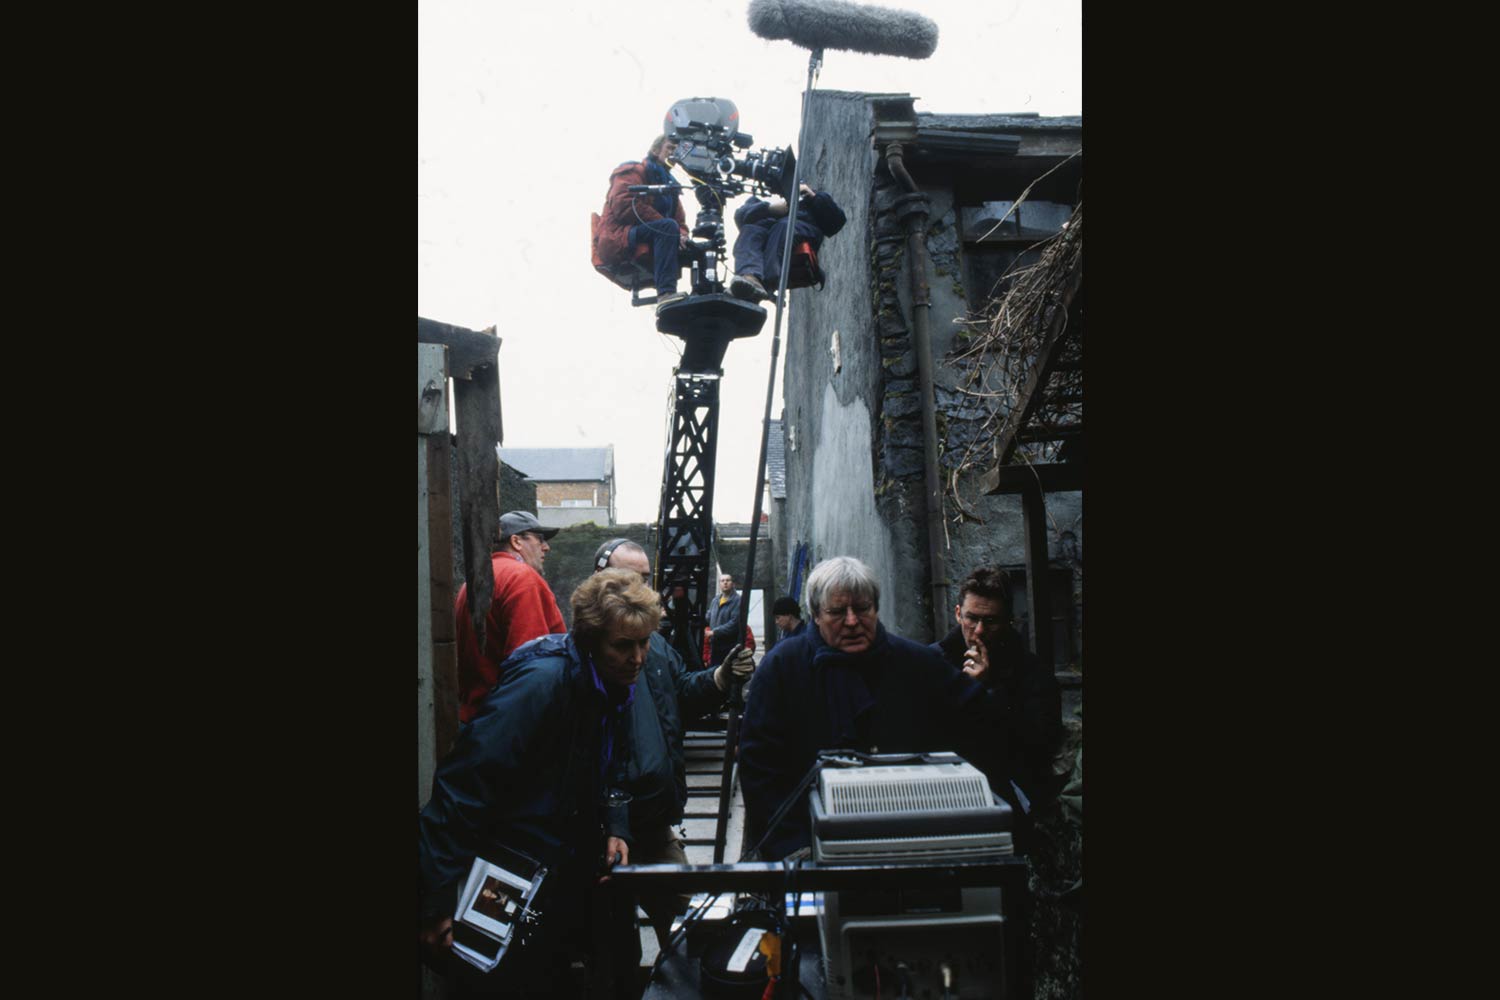 crew on the set of Angela's Ashes